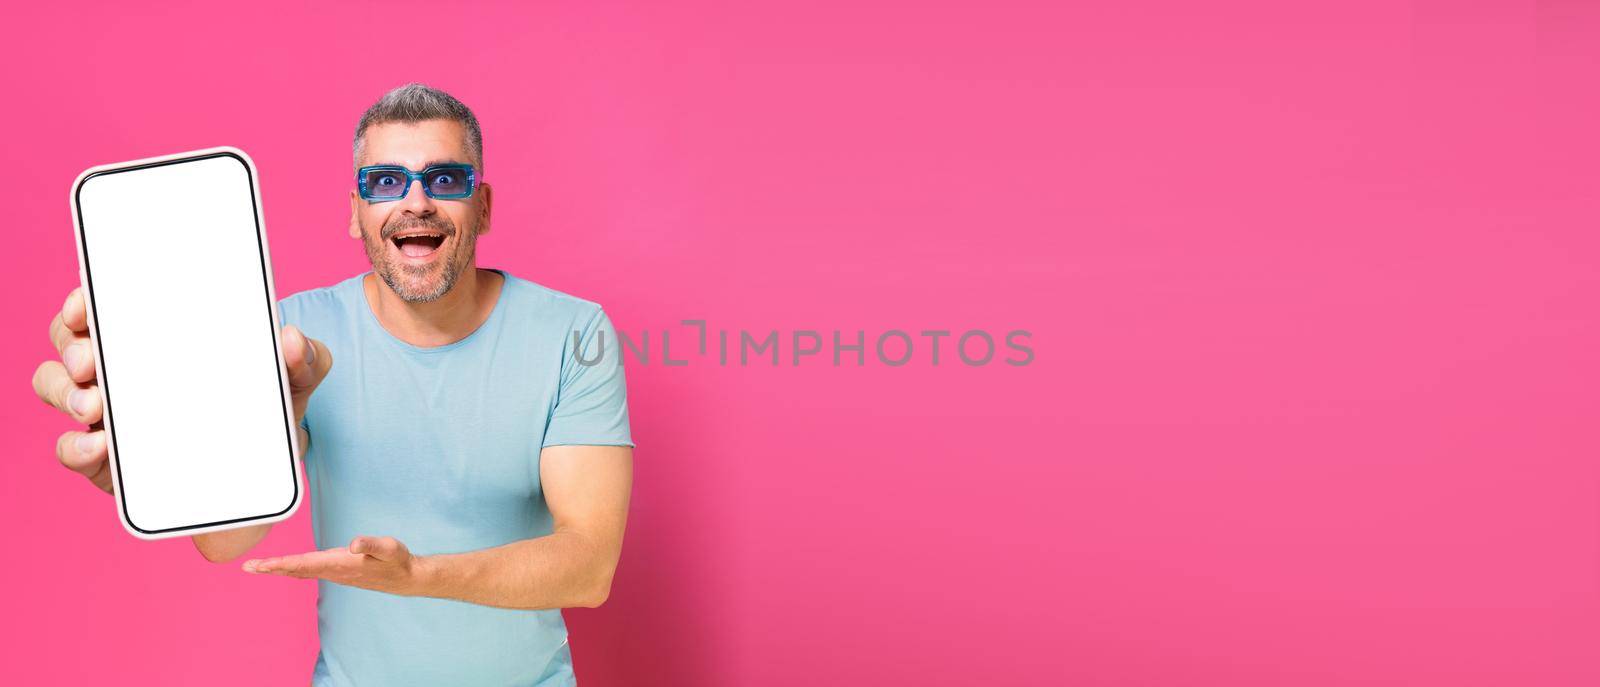 Smartphone in hand of handsome man, guy 30s 40s in casual blue shirt and sunglasses isolated on pink background. Man with phone studio shot. Mobile app advertisement. Copy space.